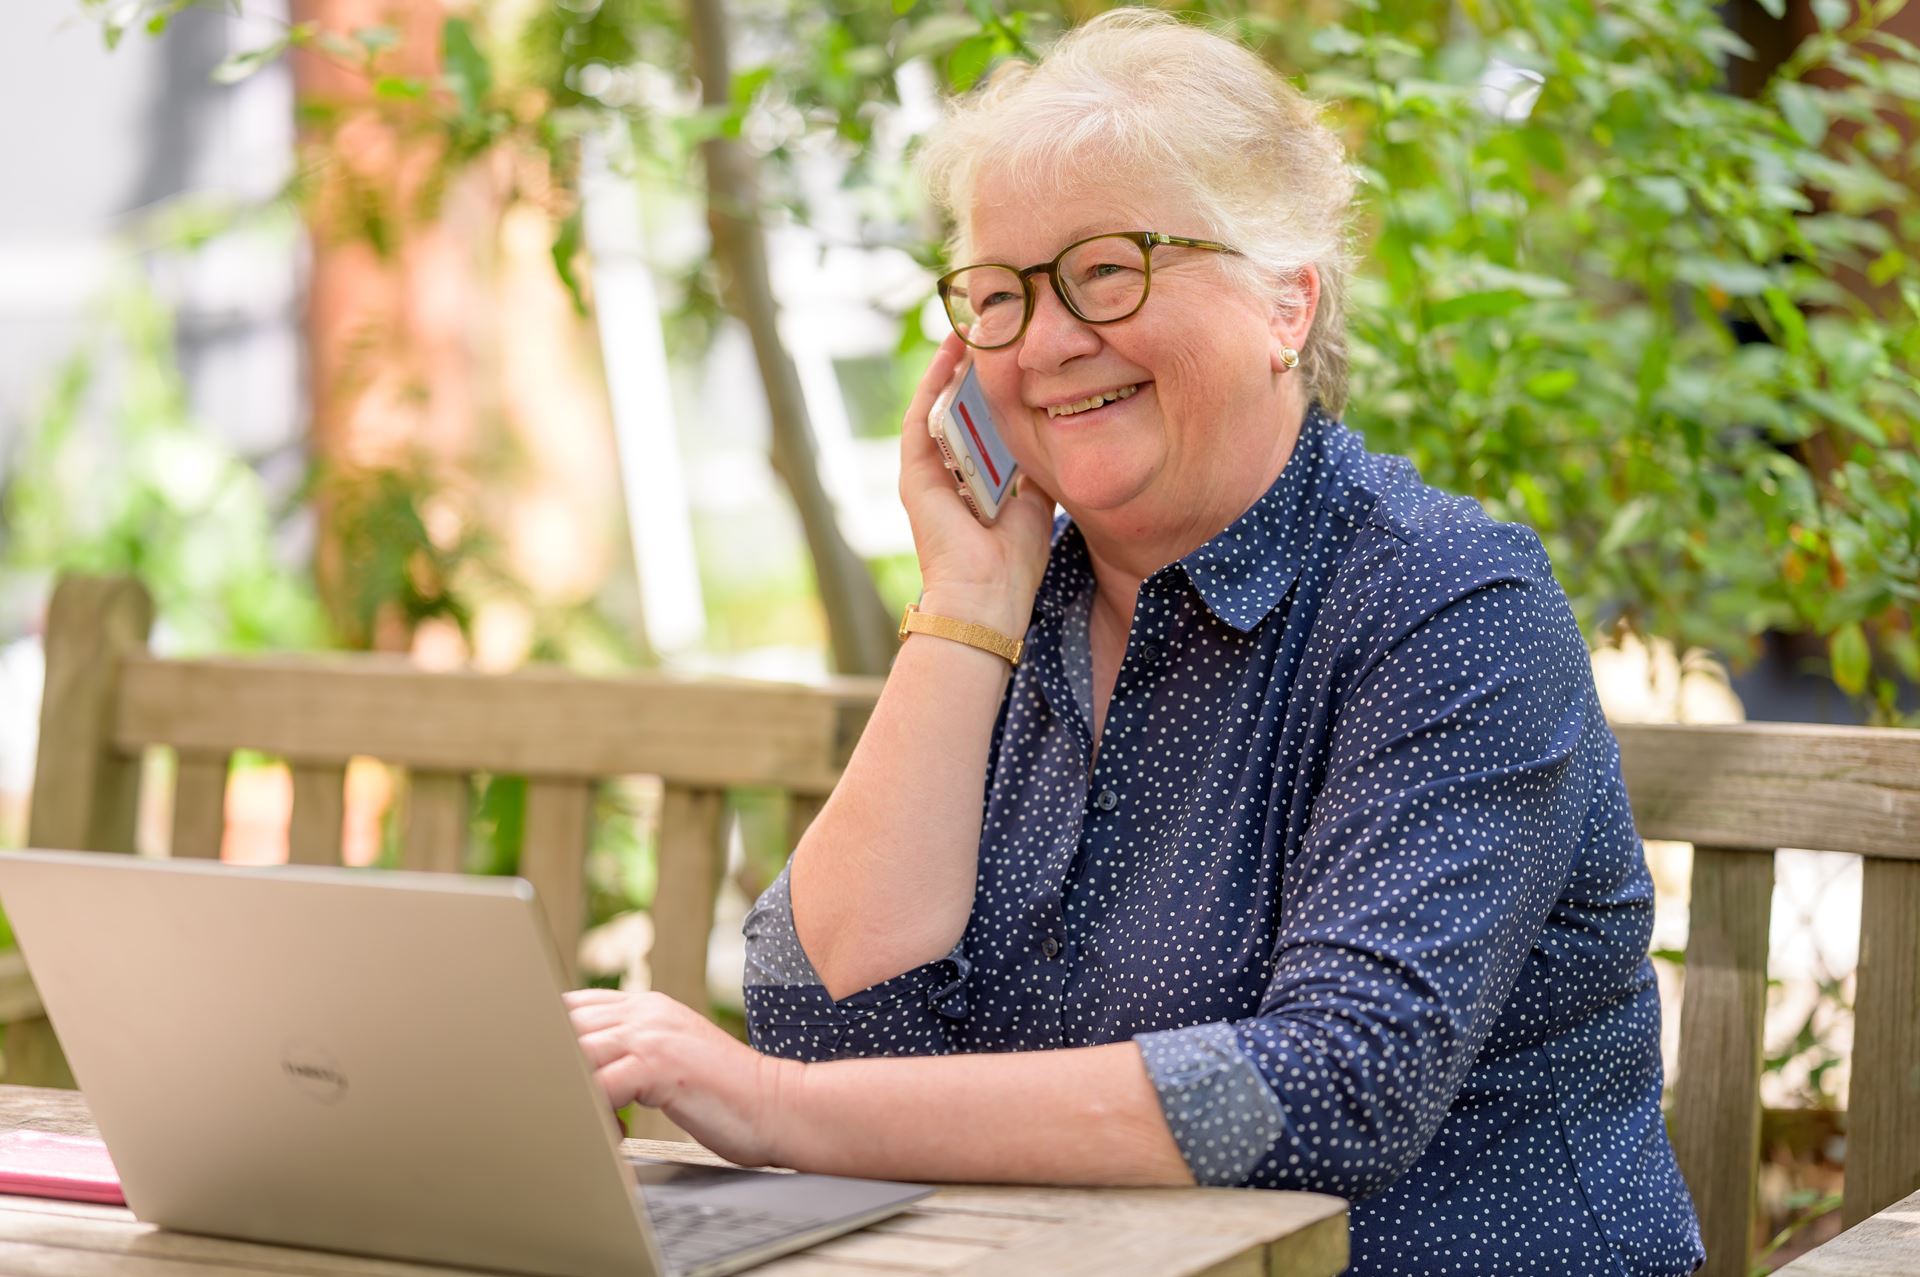 A woman with grey hair and glasses is speaking on the phone. She is smiling.